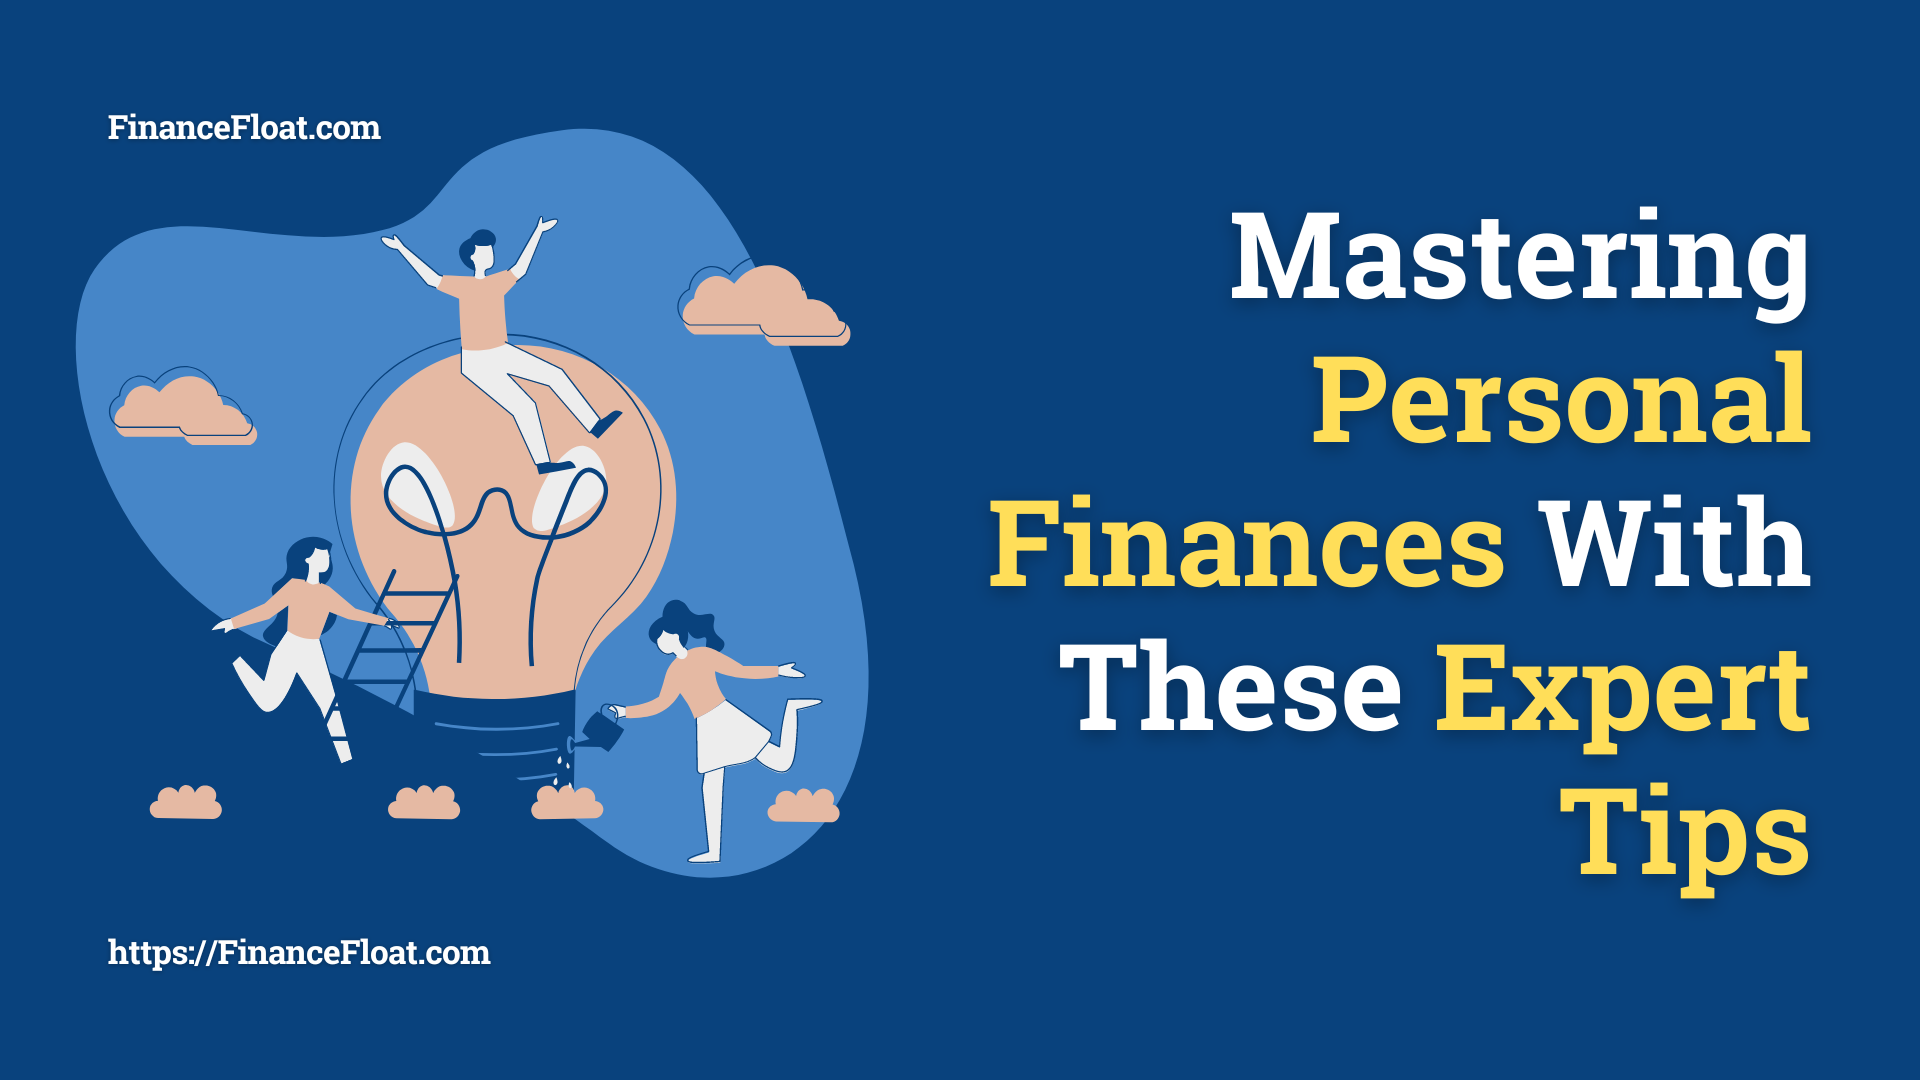 Mastering Personal Finances With These Expert Tips